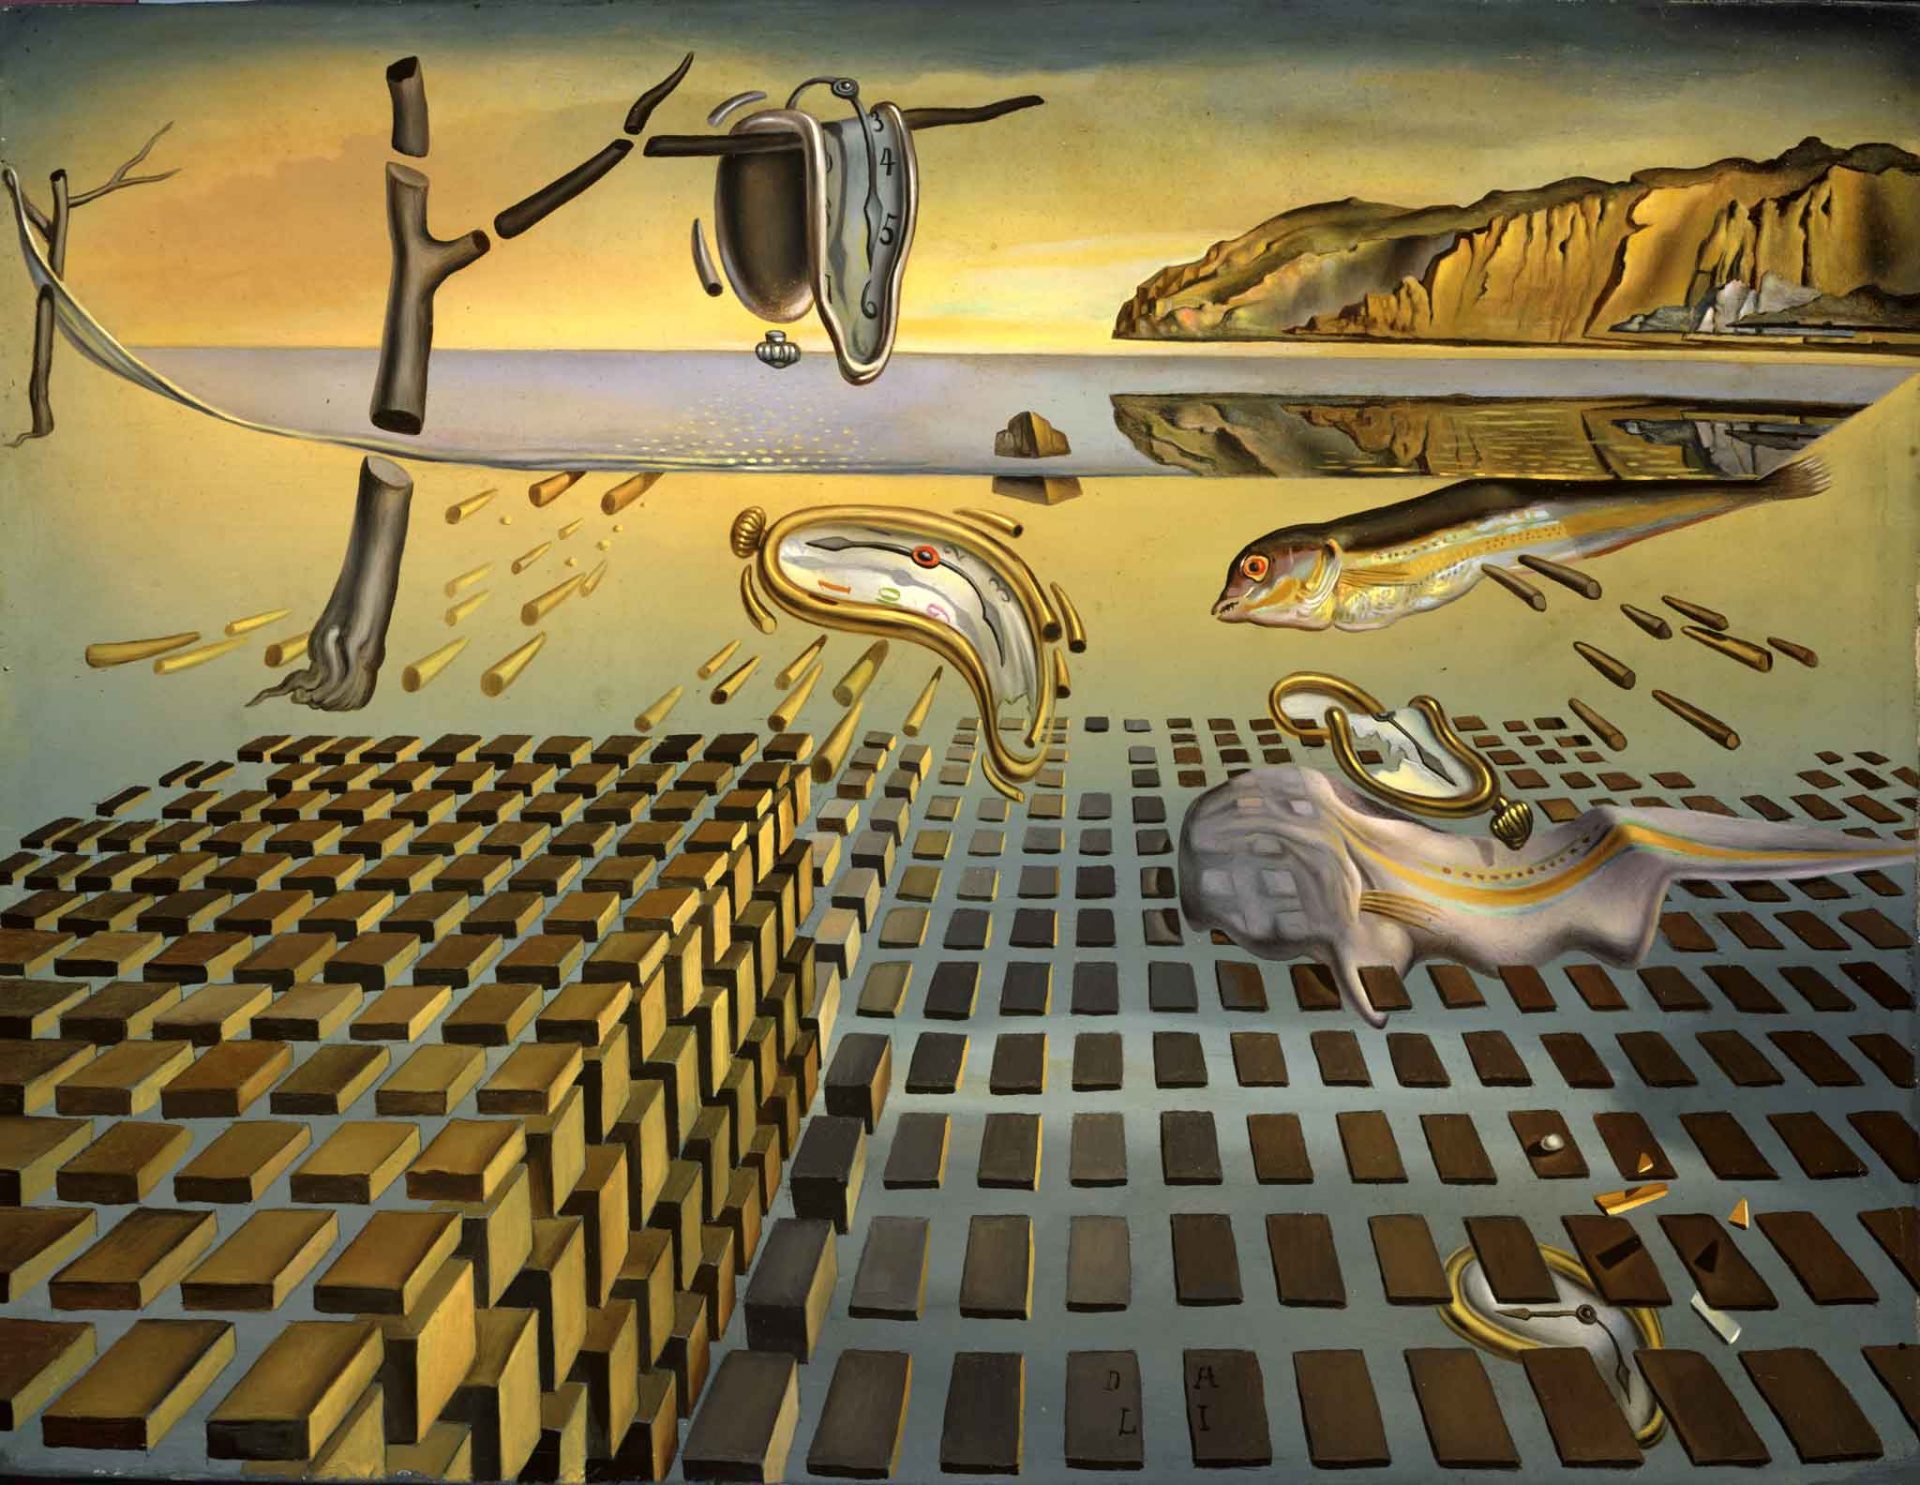 A surreal painting by Salvador Dali that depicts a landscape with a body of water and cliffs in the background. The foreground consists of a grid-like structure with a melting clock and a fish on top of it. The background consists of a tree with a melting clock. The painting is an oil on canvas and is a reinterpretation of Dali’s earlier work The Persistence of Memory. The painting is a commentary on the concept of time and its fluidity.